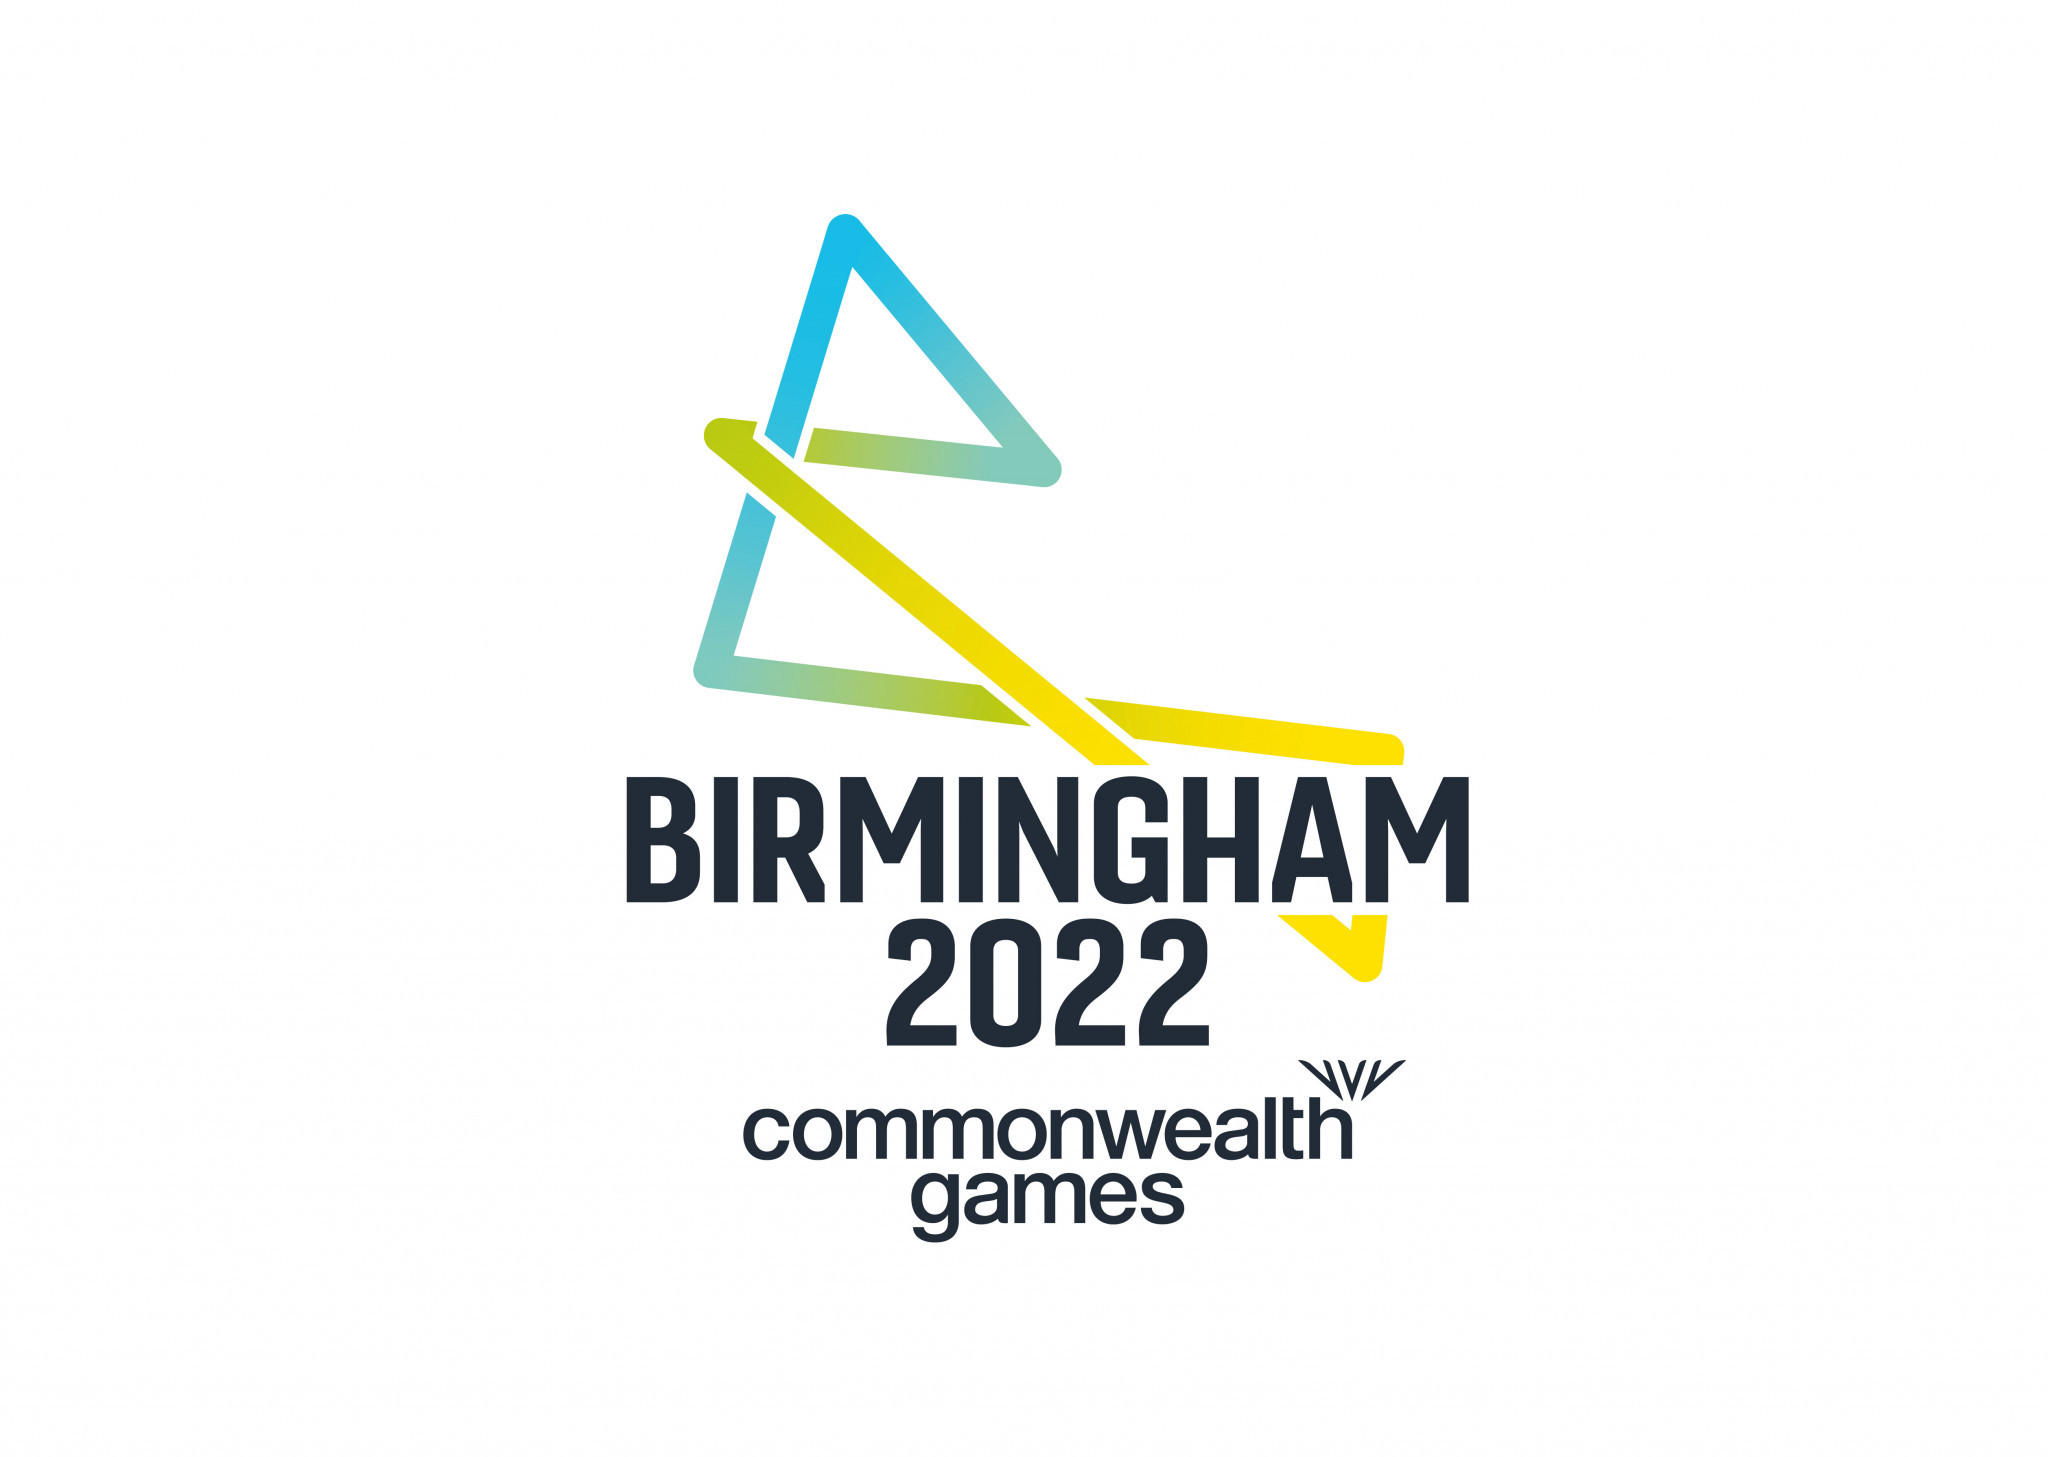 Birmingham 2022 has launched its new logo with three years to go until the start of the Commonwealth Games ©Birmingham 2022